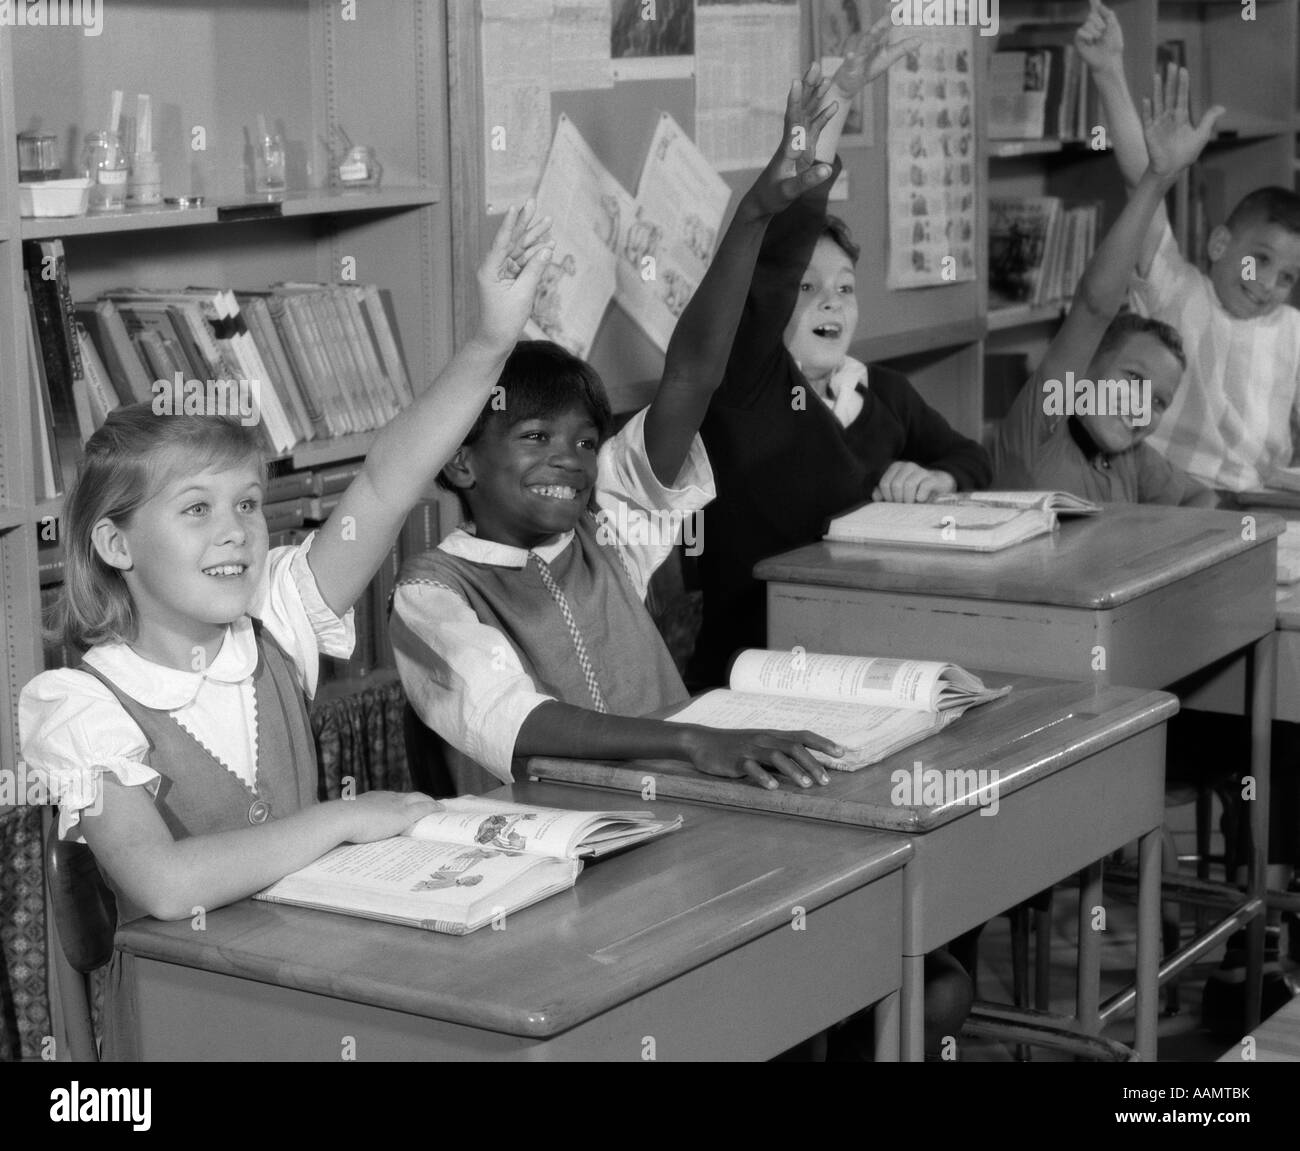 1960s GROUP OF GRADE SCHOOL CHILDREN AT ROW OF DESKS EAGERLY RAISING HANDS Stock Photo